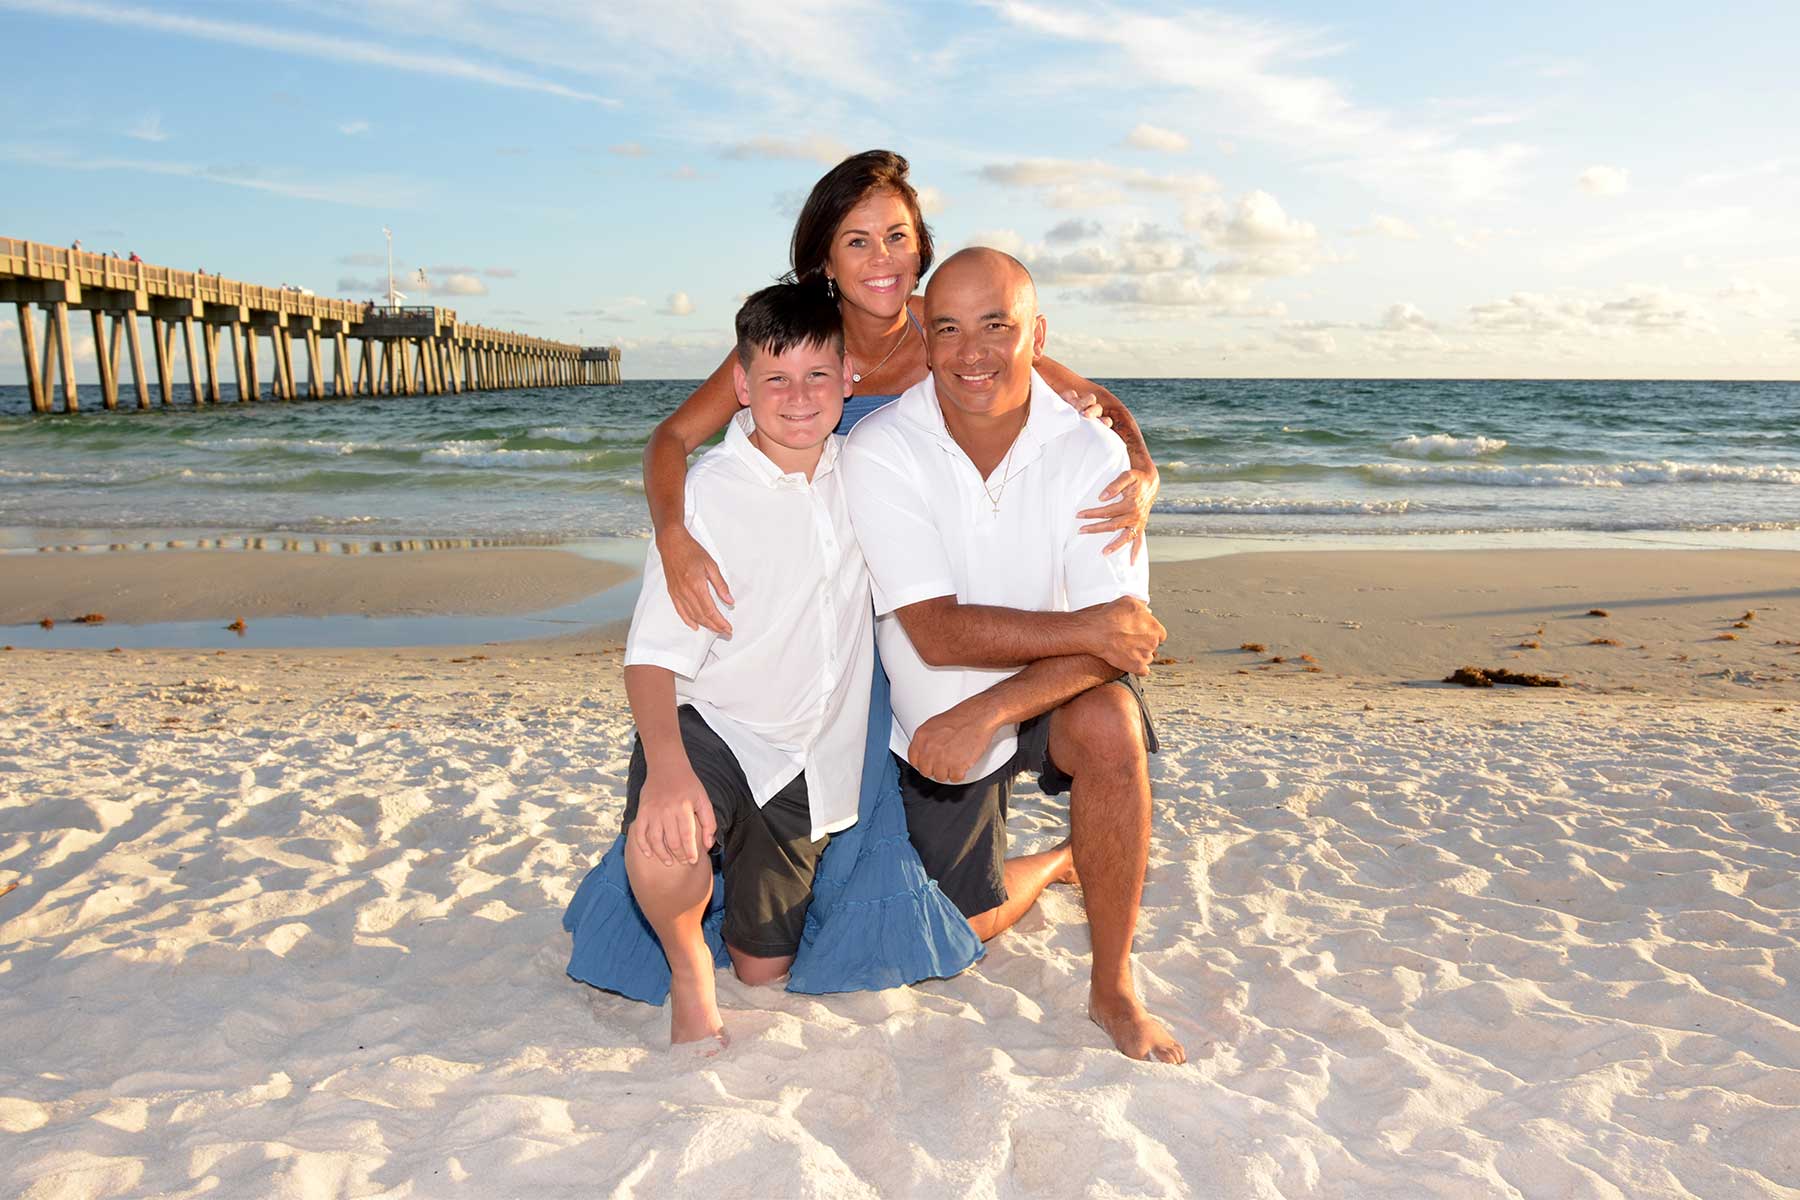 Panama City Beach has many options for backdrops, but the pier adds a depth to the photo.